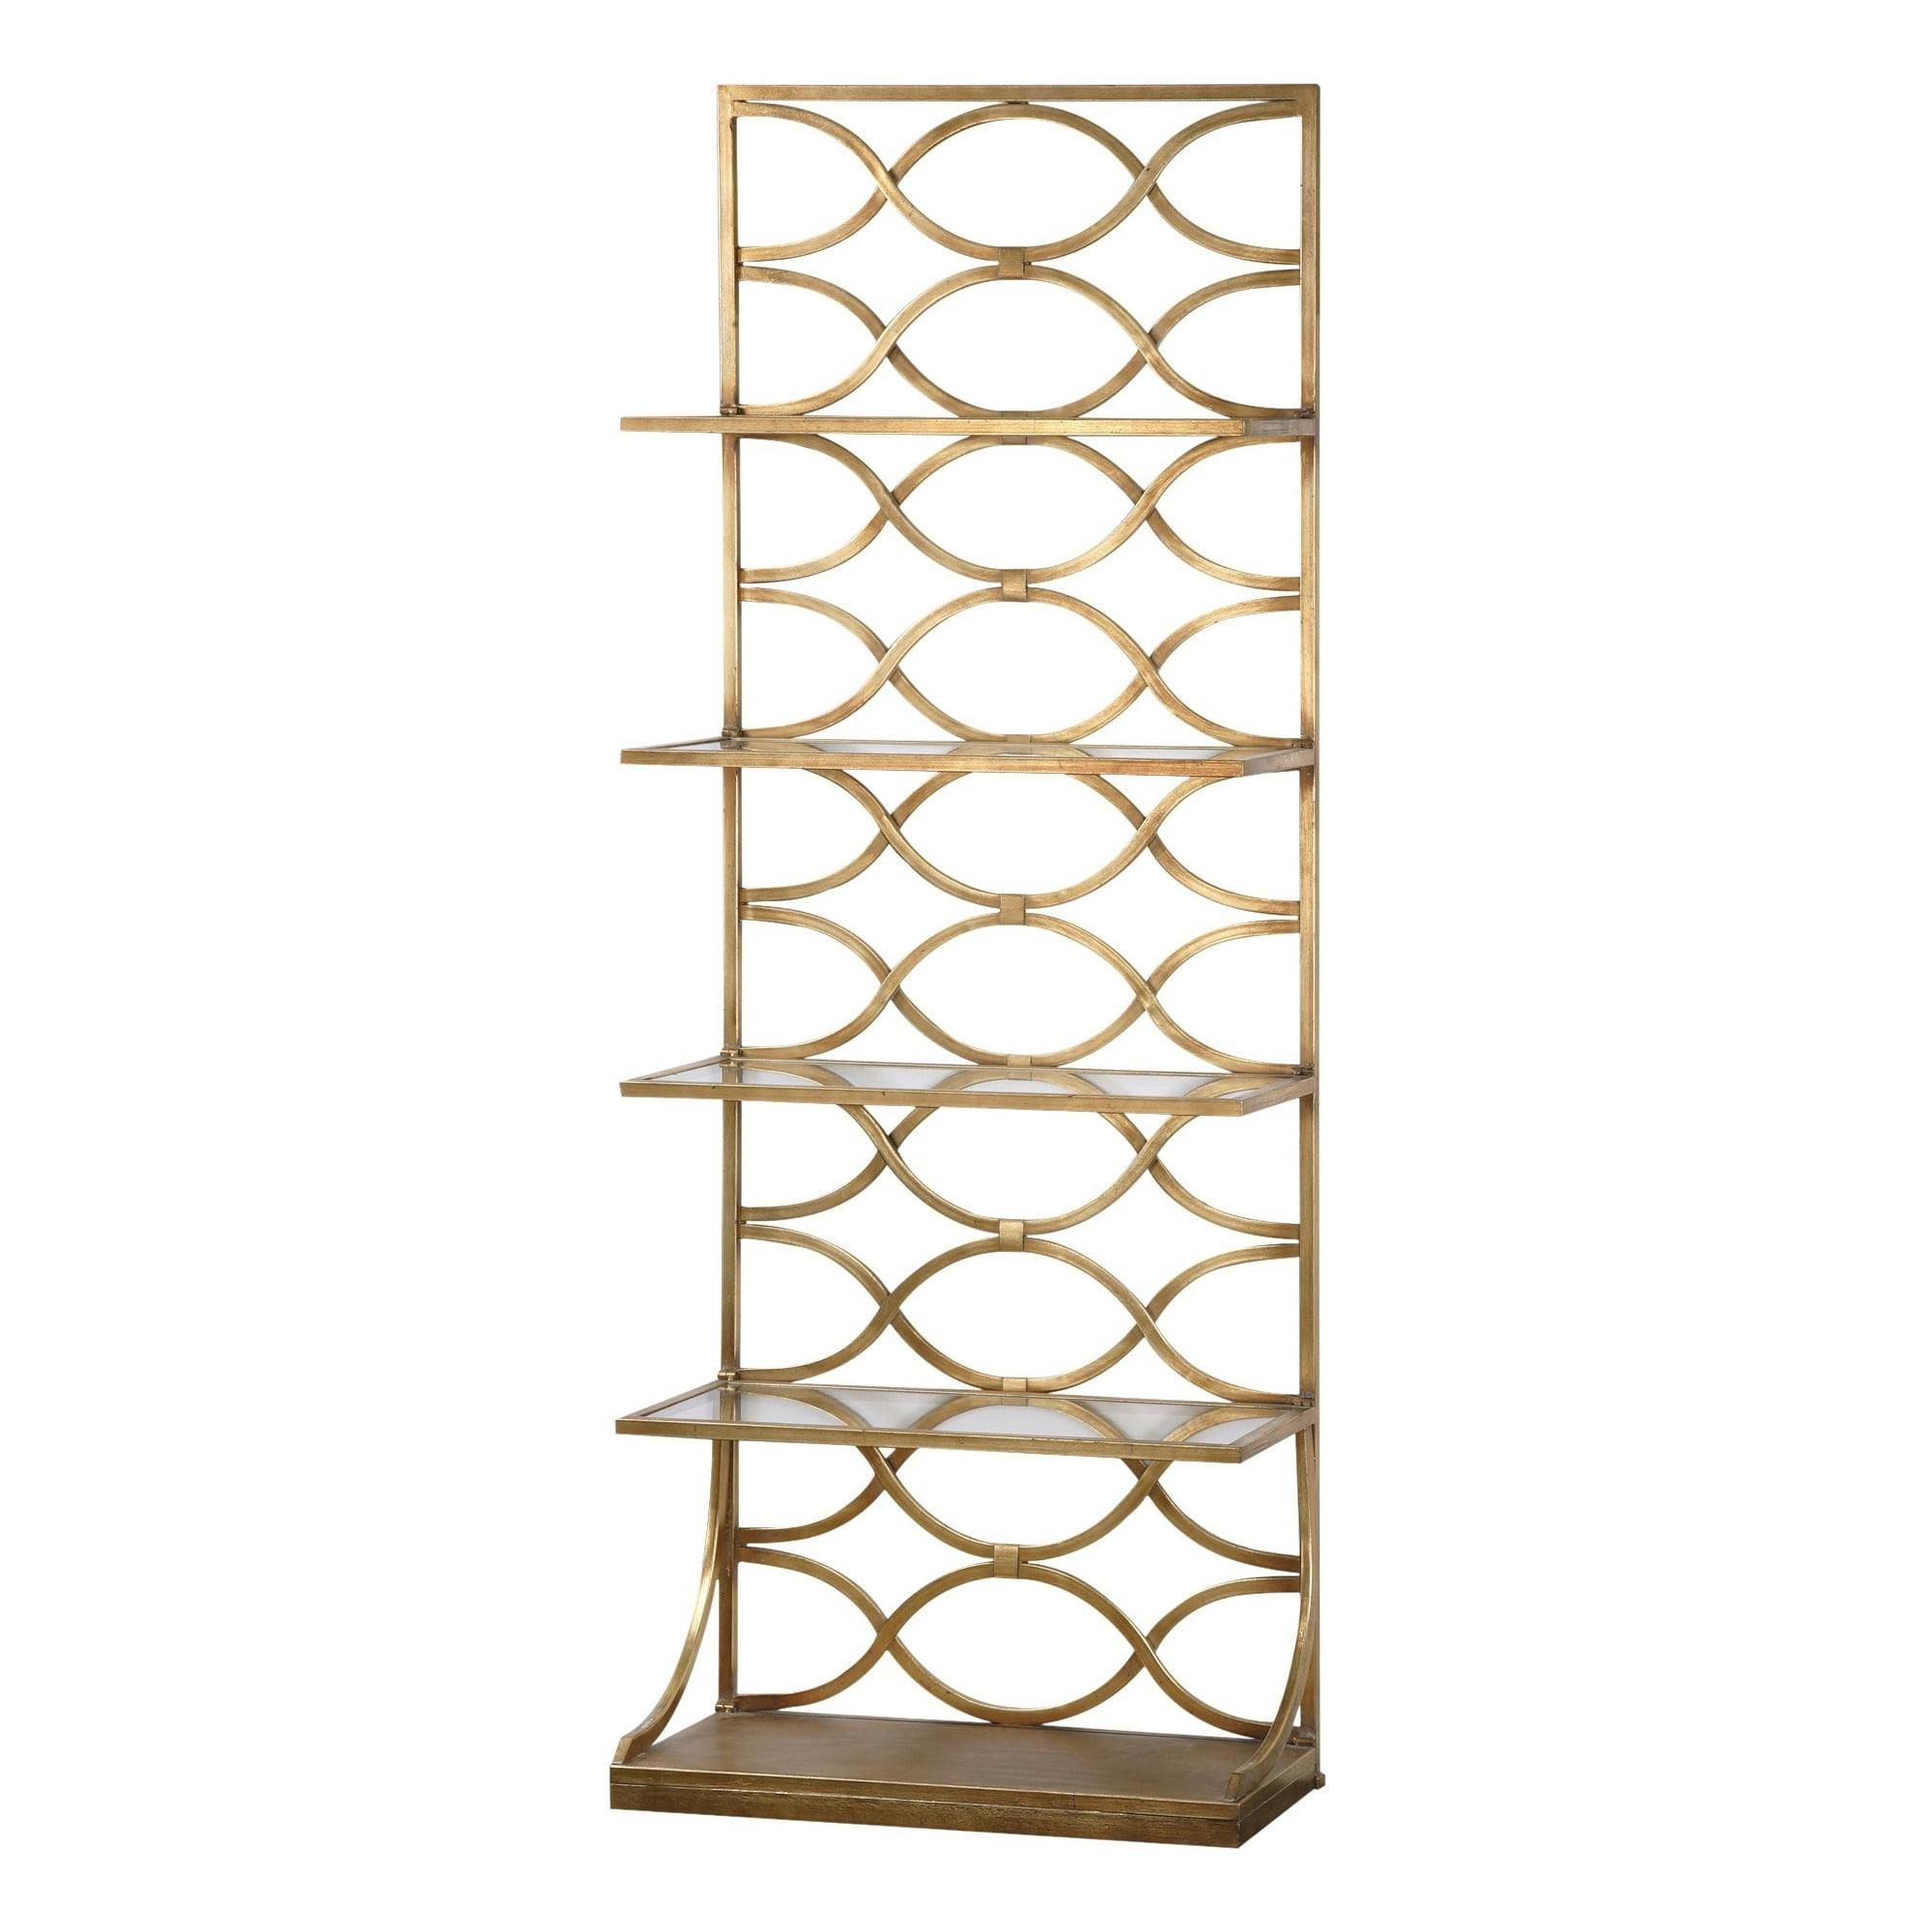 Lustrous Gold Leaf 30" Forged Iron Etagere with Tempered Glass Shelves